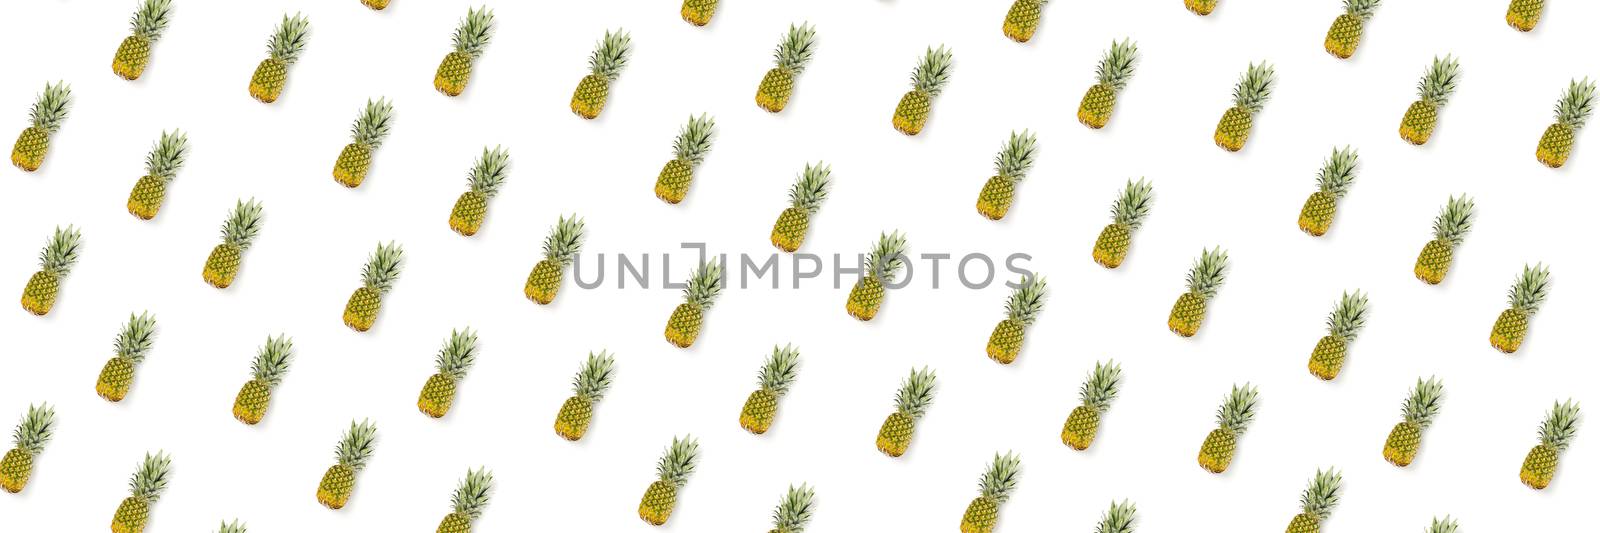 Pineapple set on white background. Flat lay made from ananas. isolated pineapple on white background by PhotoTime